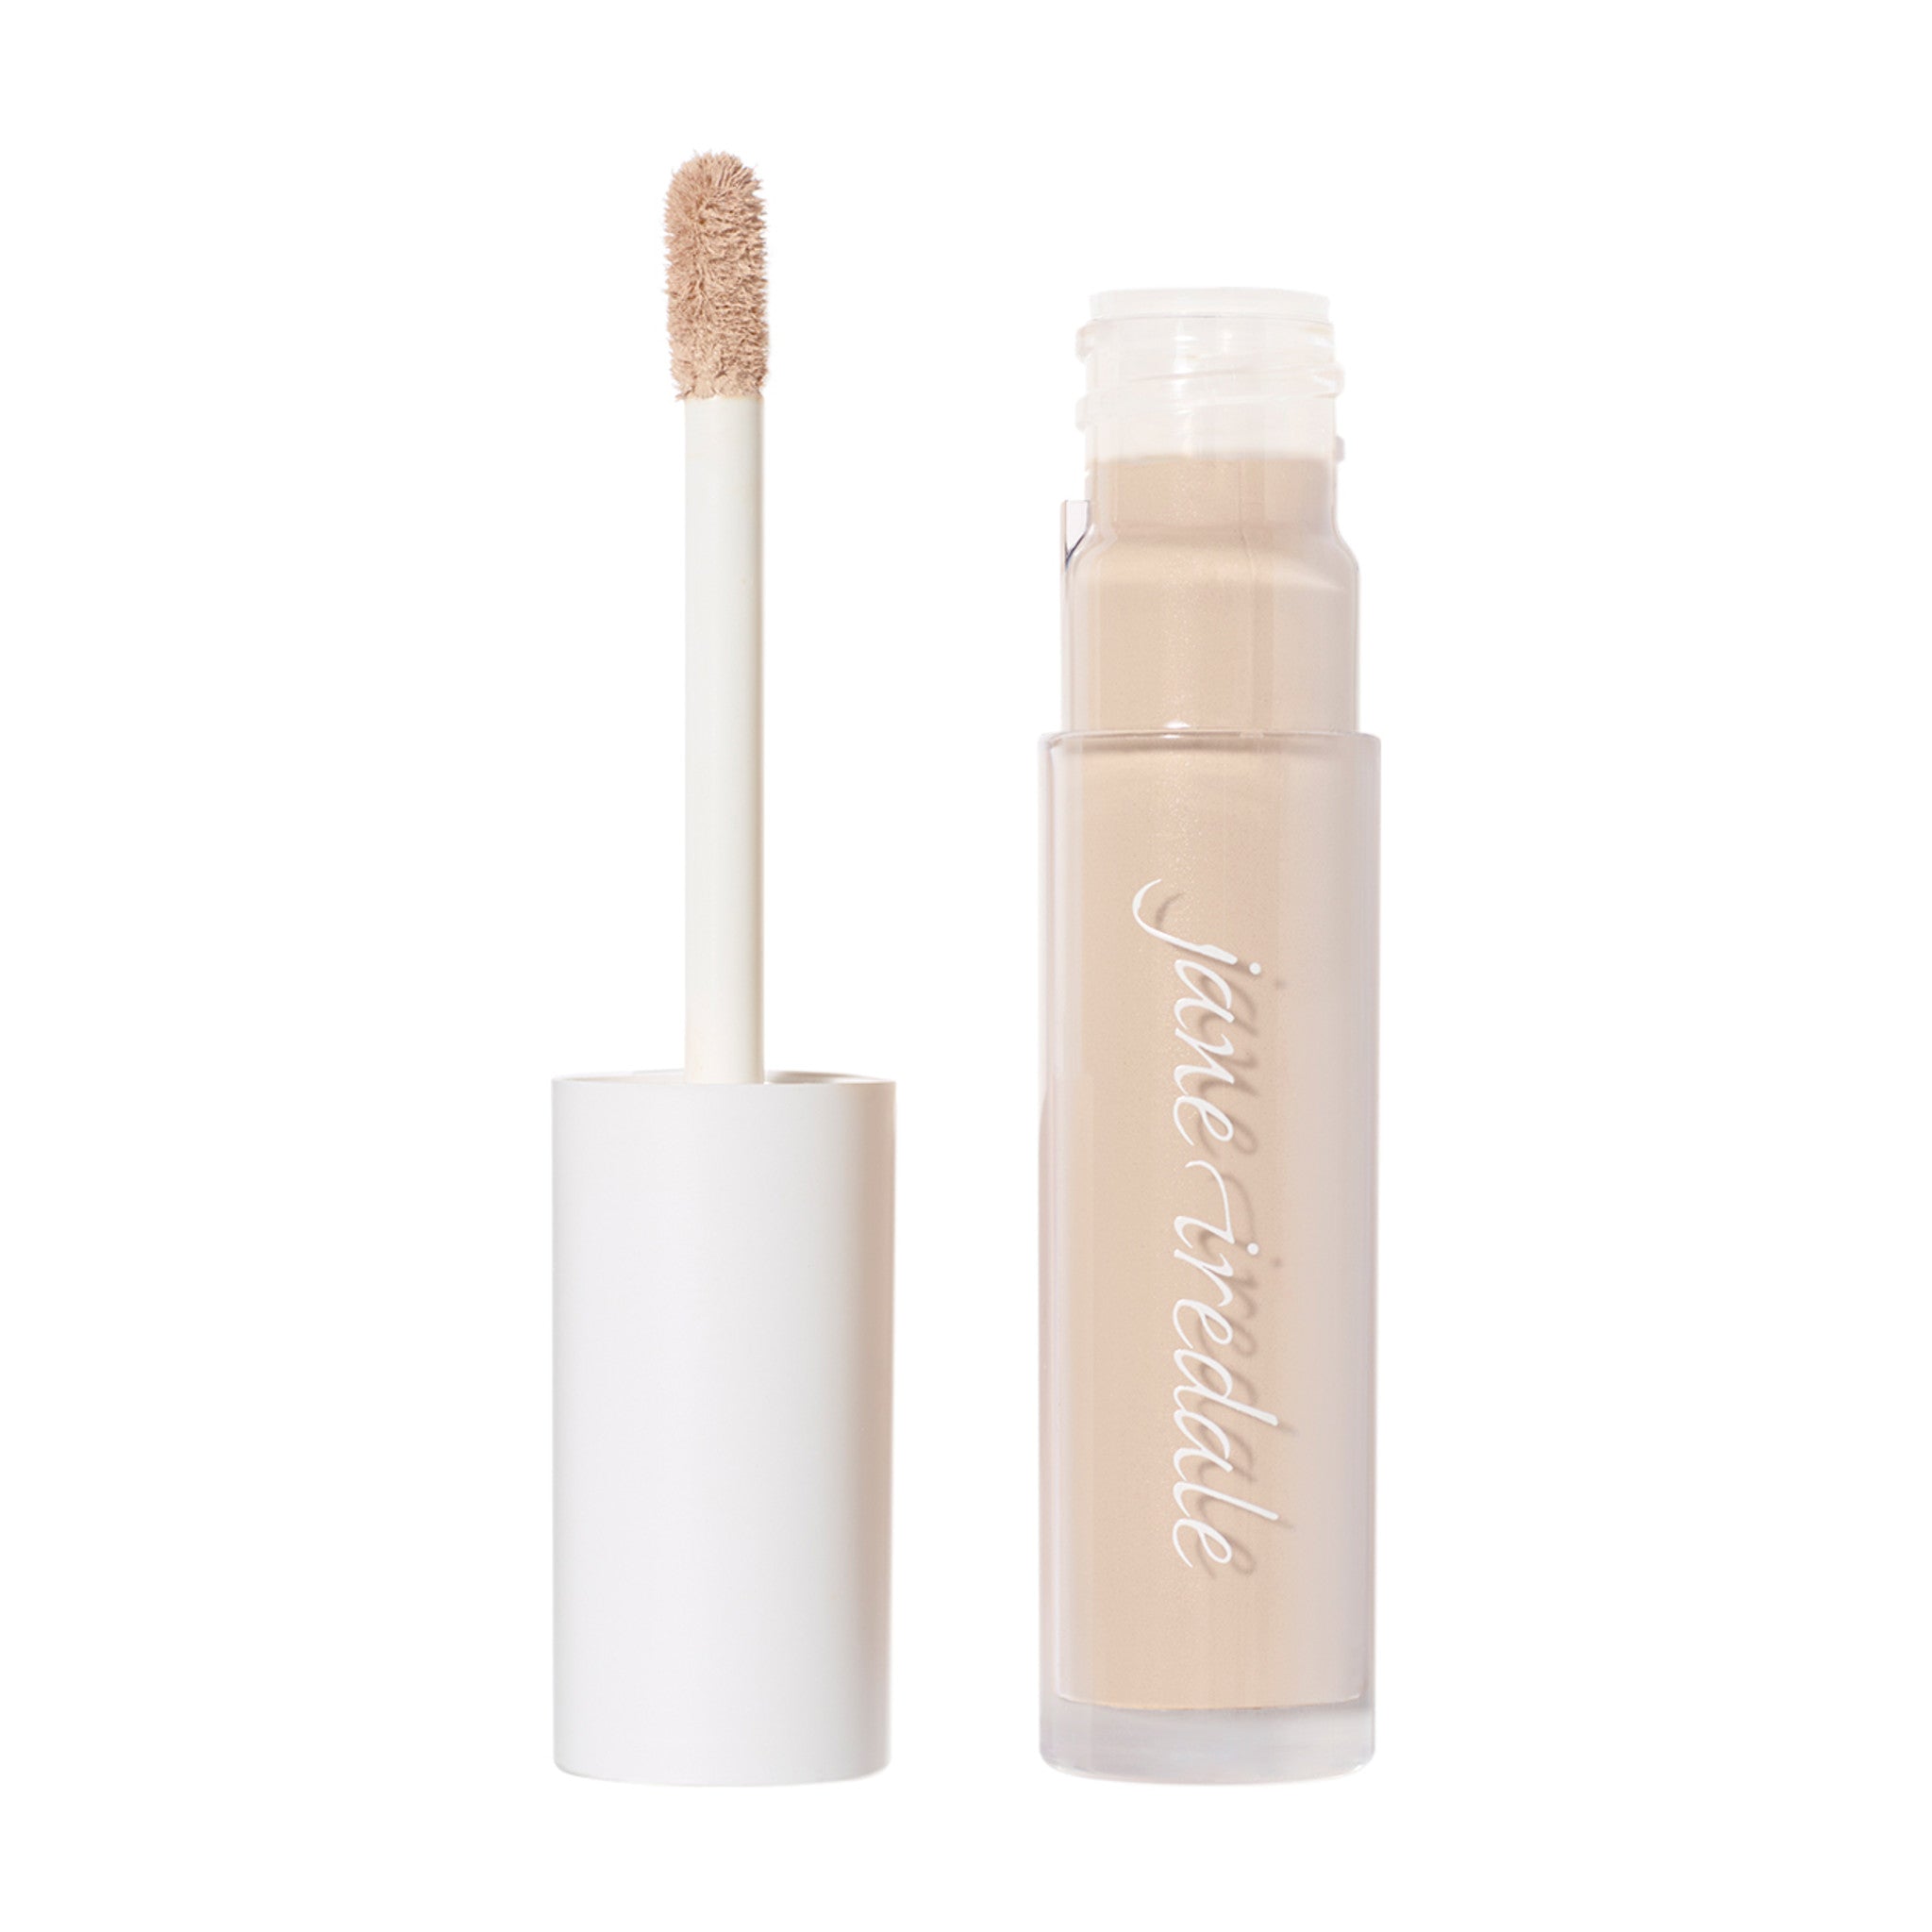 Jane Iredale PureMatch Liquid Concealer Color/Shade variant: 1W main image. This product is in the color nude